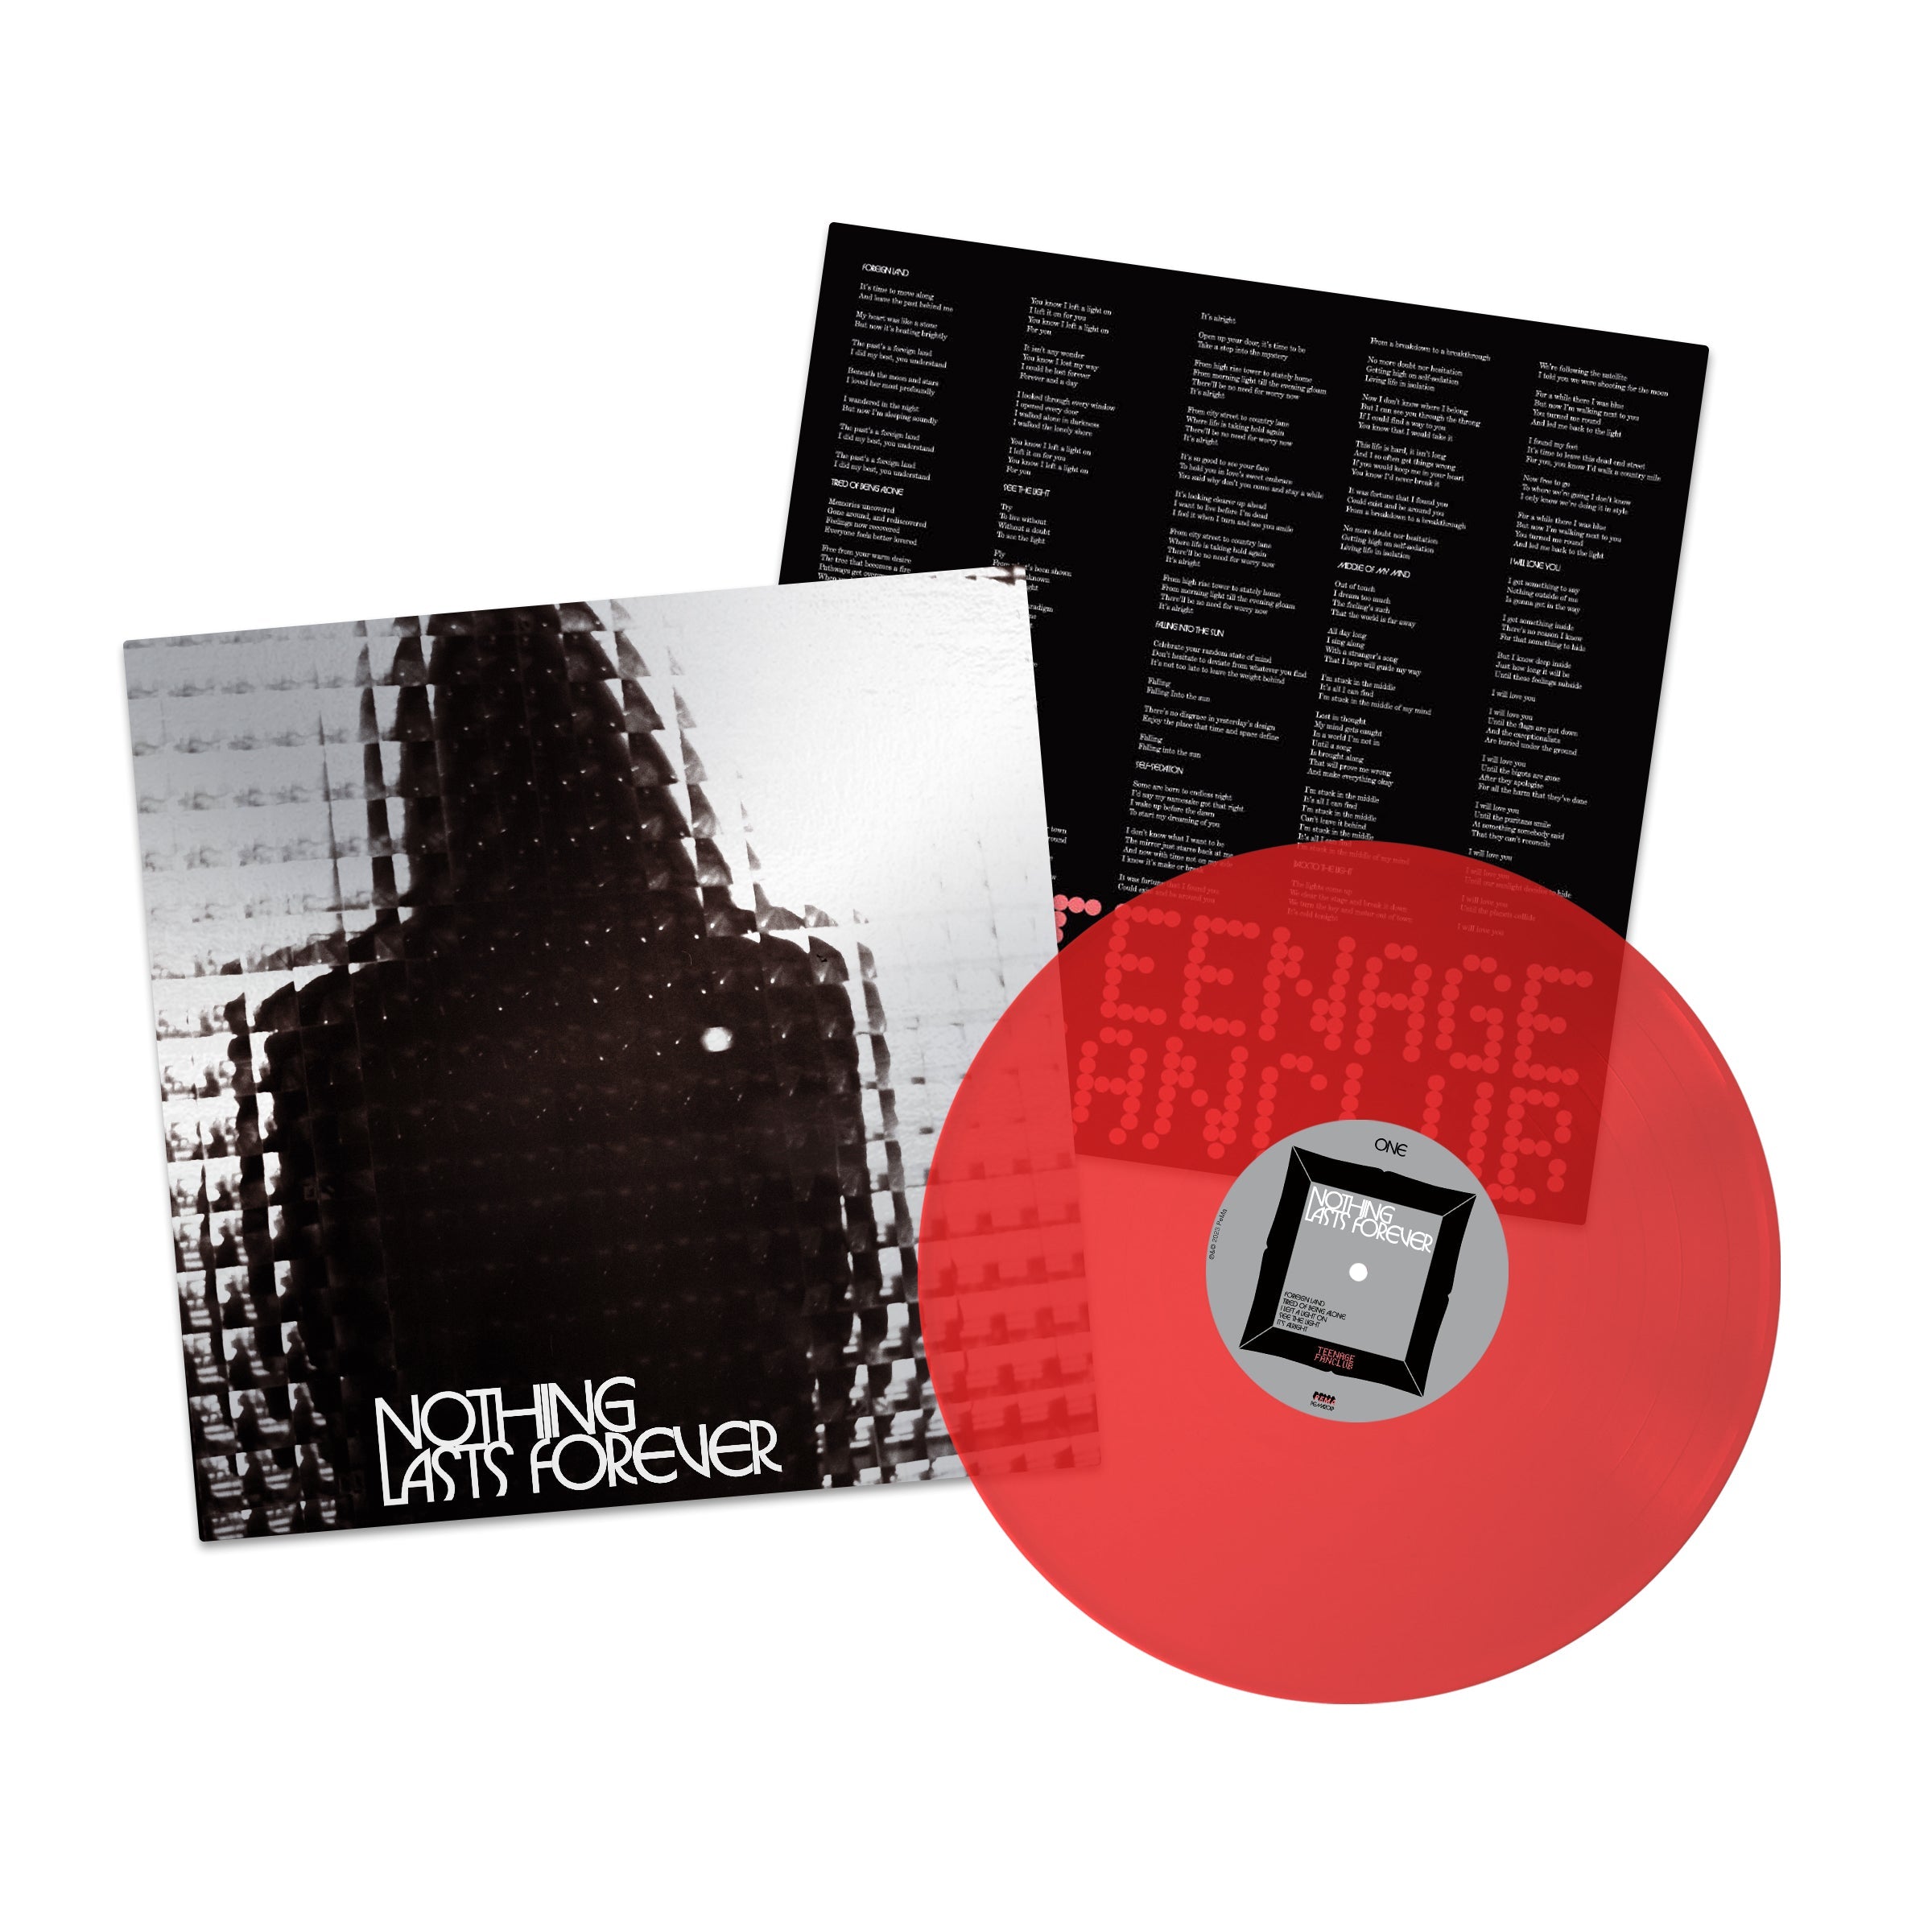 Nothing Lasts Forever: Limited Translucent Red Vinyl LP + Exclusive Signed Print